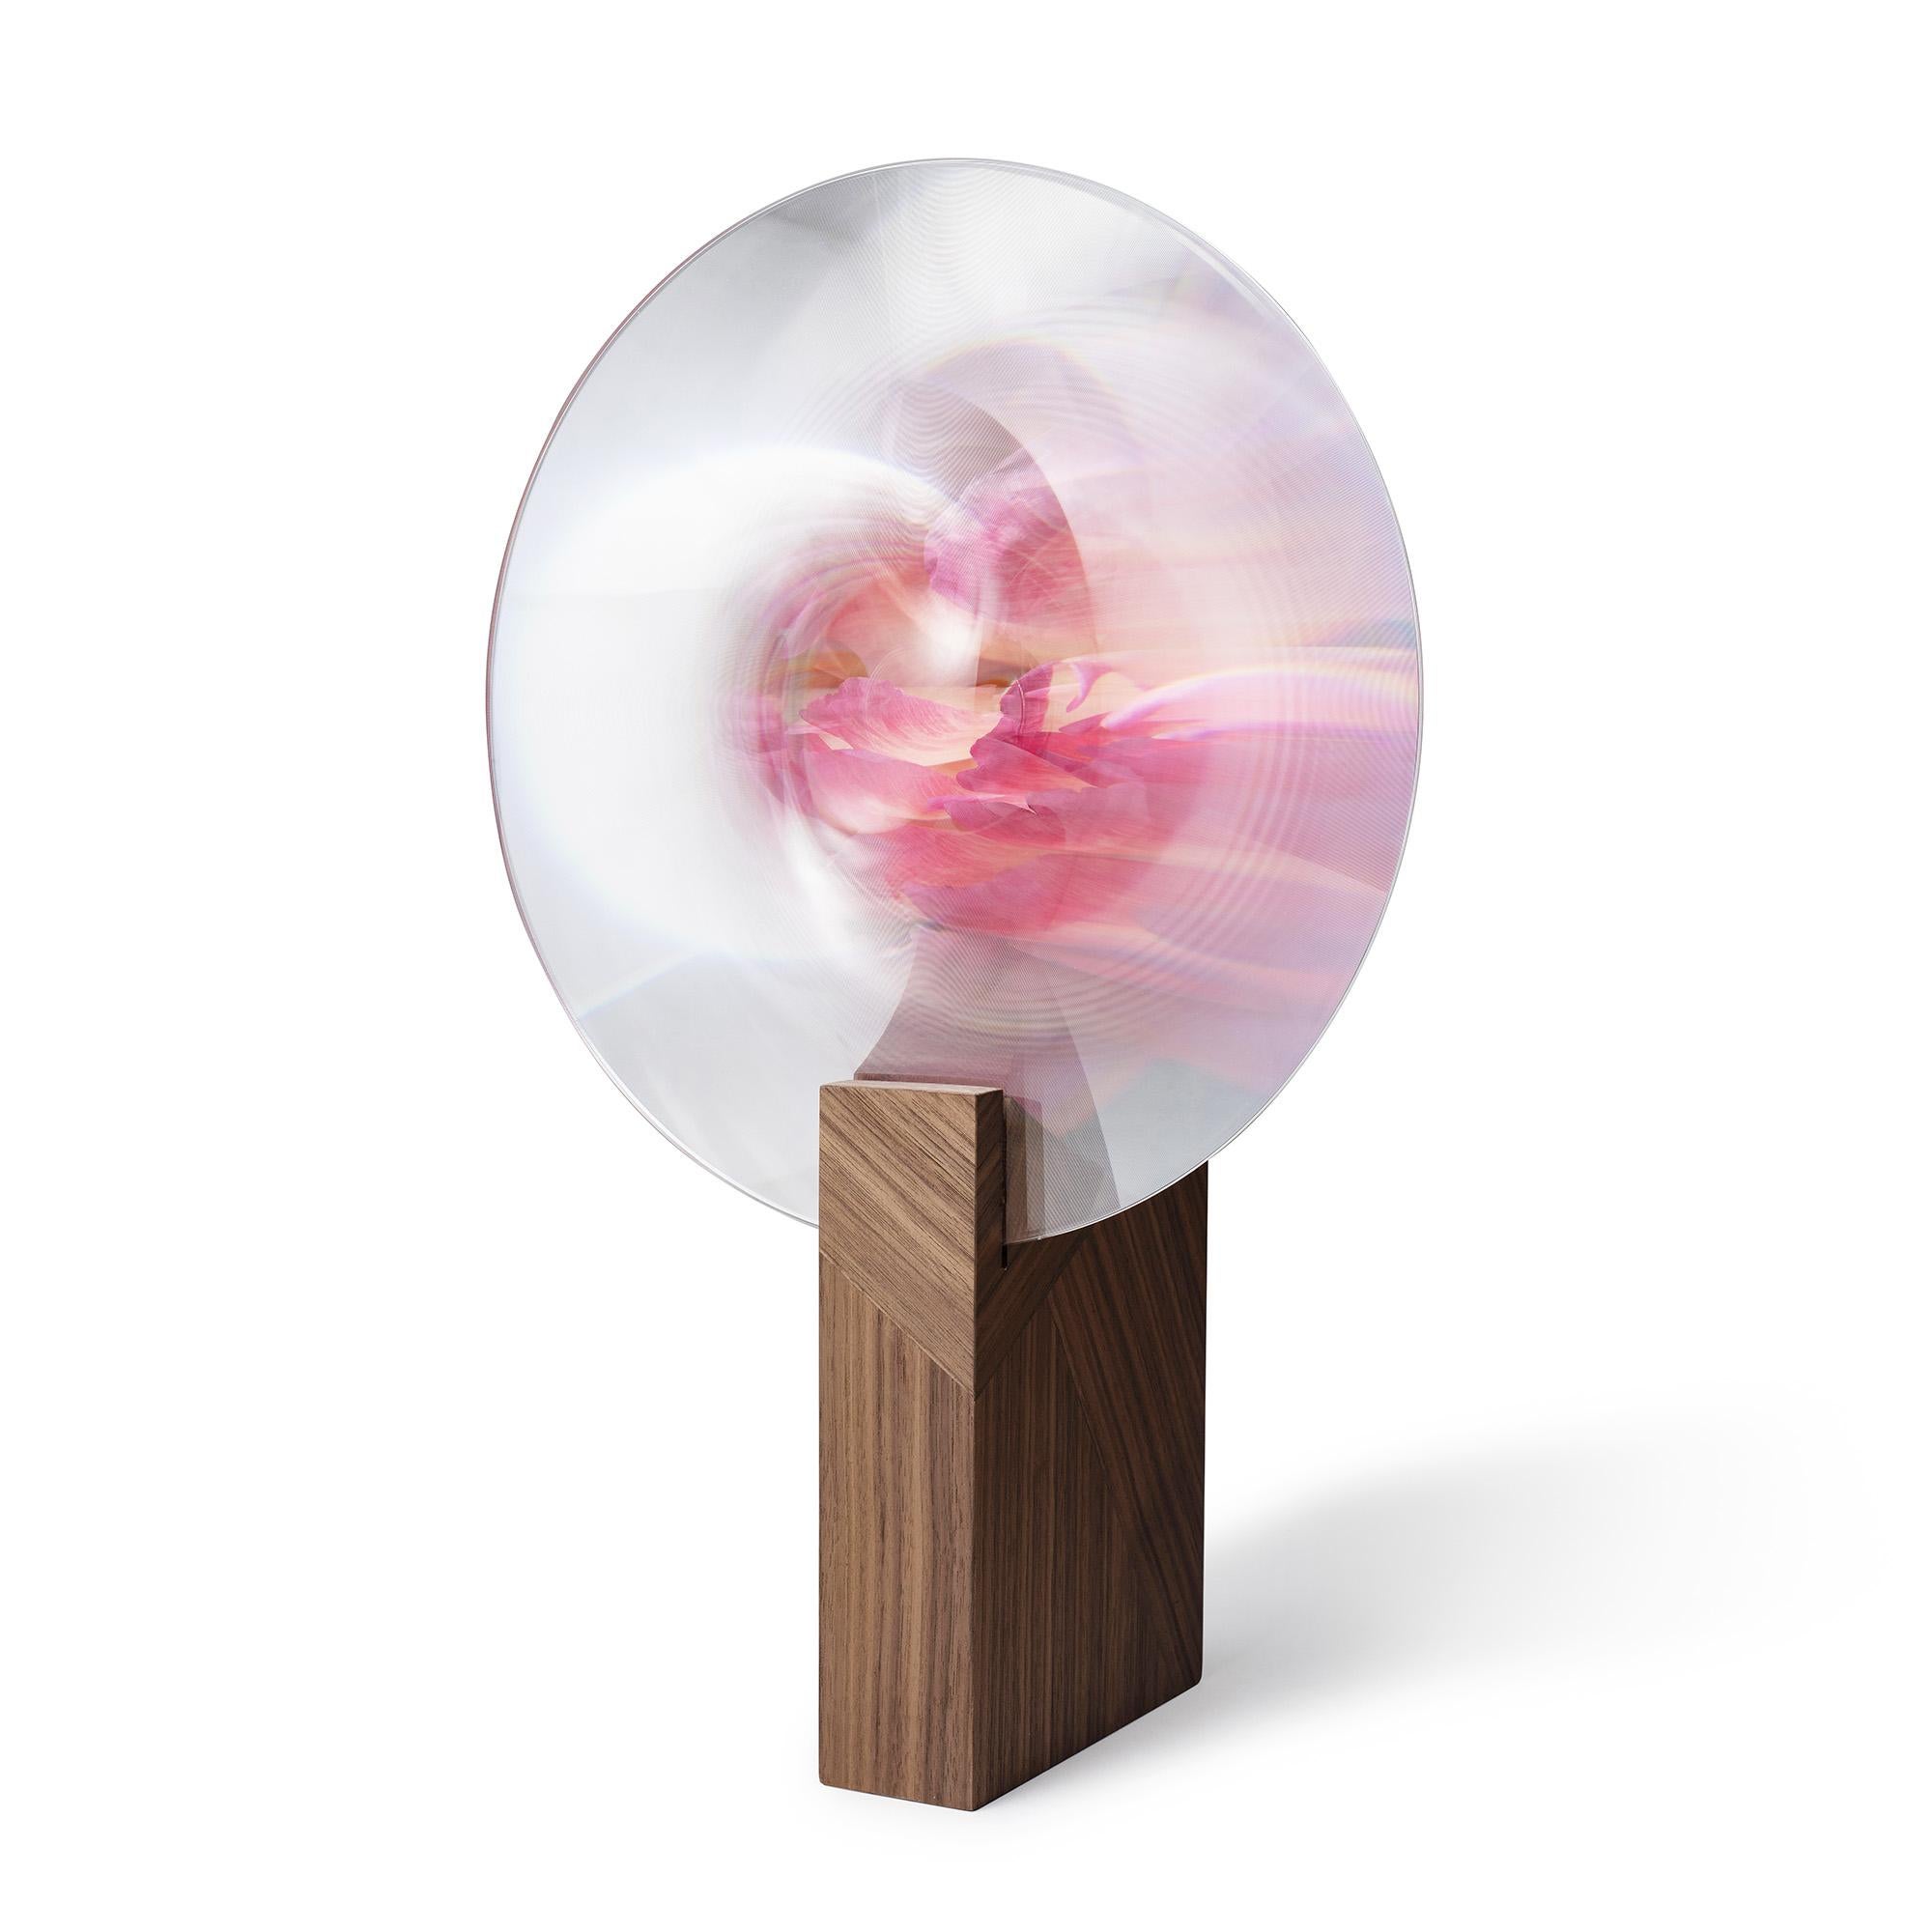 Walnut Narcisse vase by Najma Temsoury
Dimensions: D 16.6 x W 30 x H 45 cm 
Materials: Solid wood with veneer, stainless steel tube, the lens in PMMA with diameter 300 mm.
Also available in colors: Walnut, oak, black. 


The myth of Narcissus